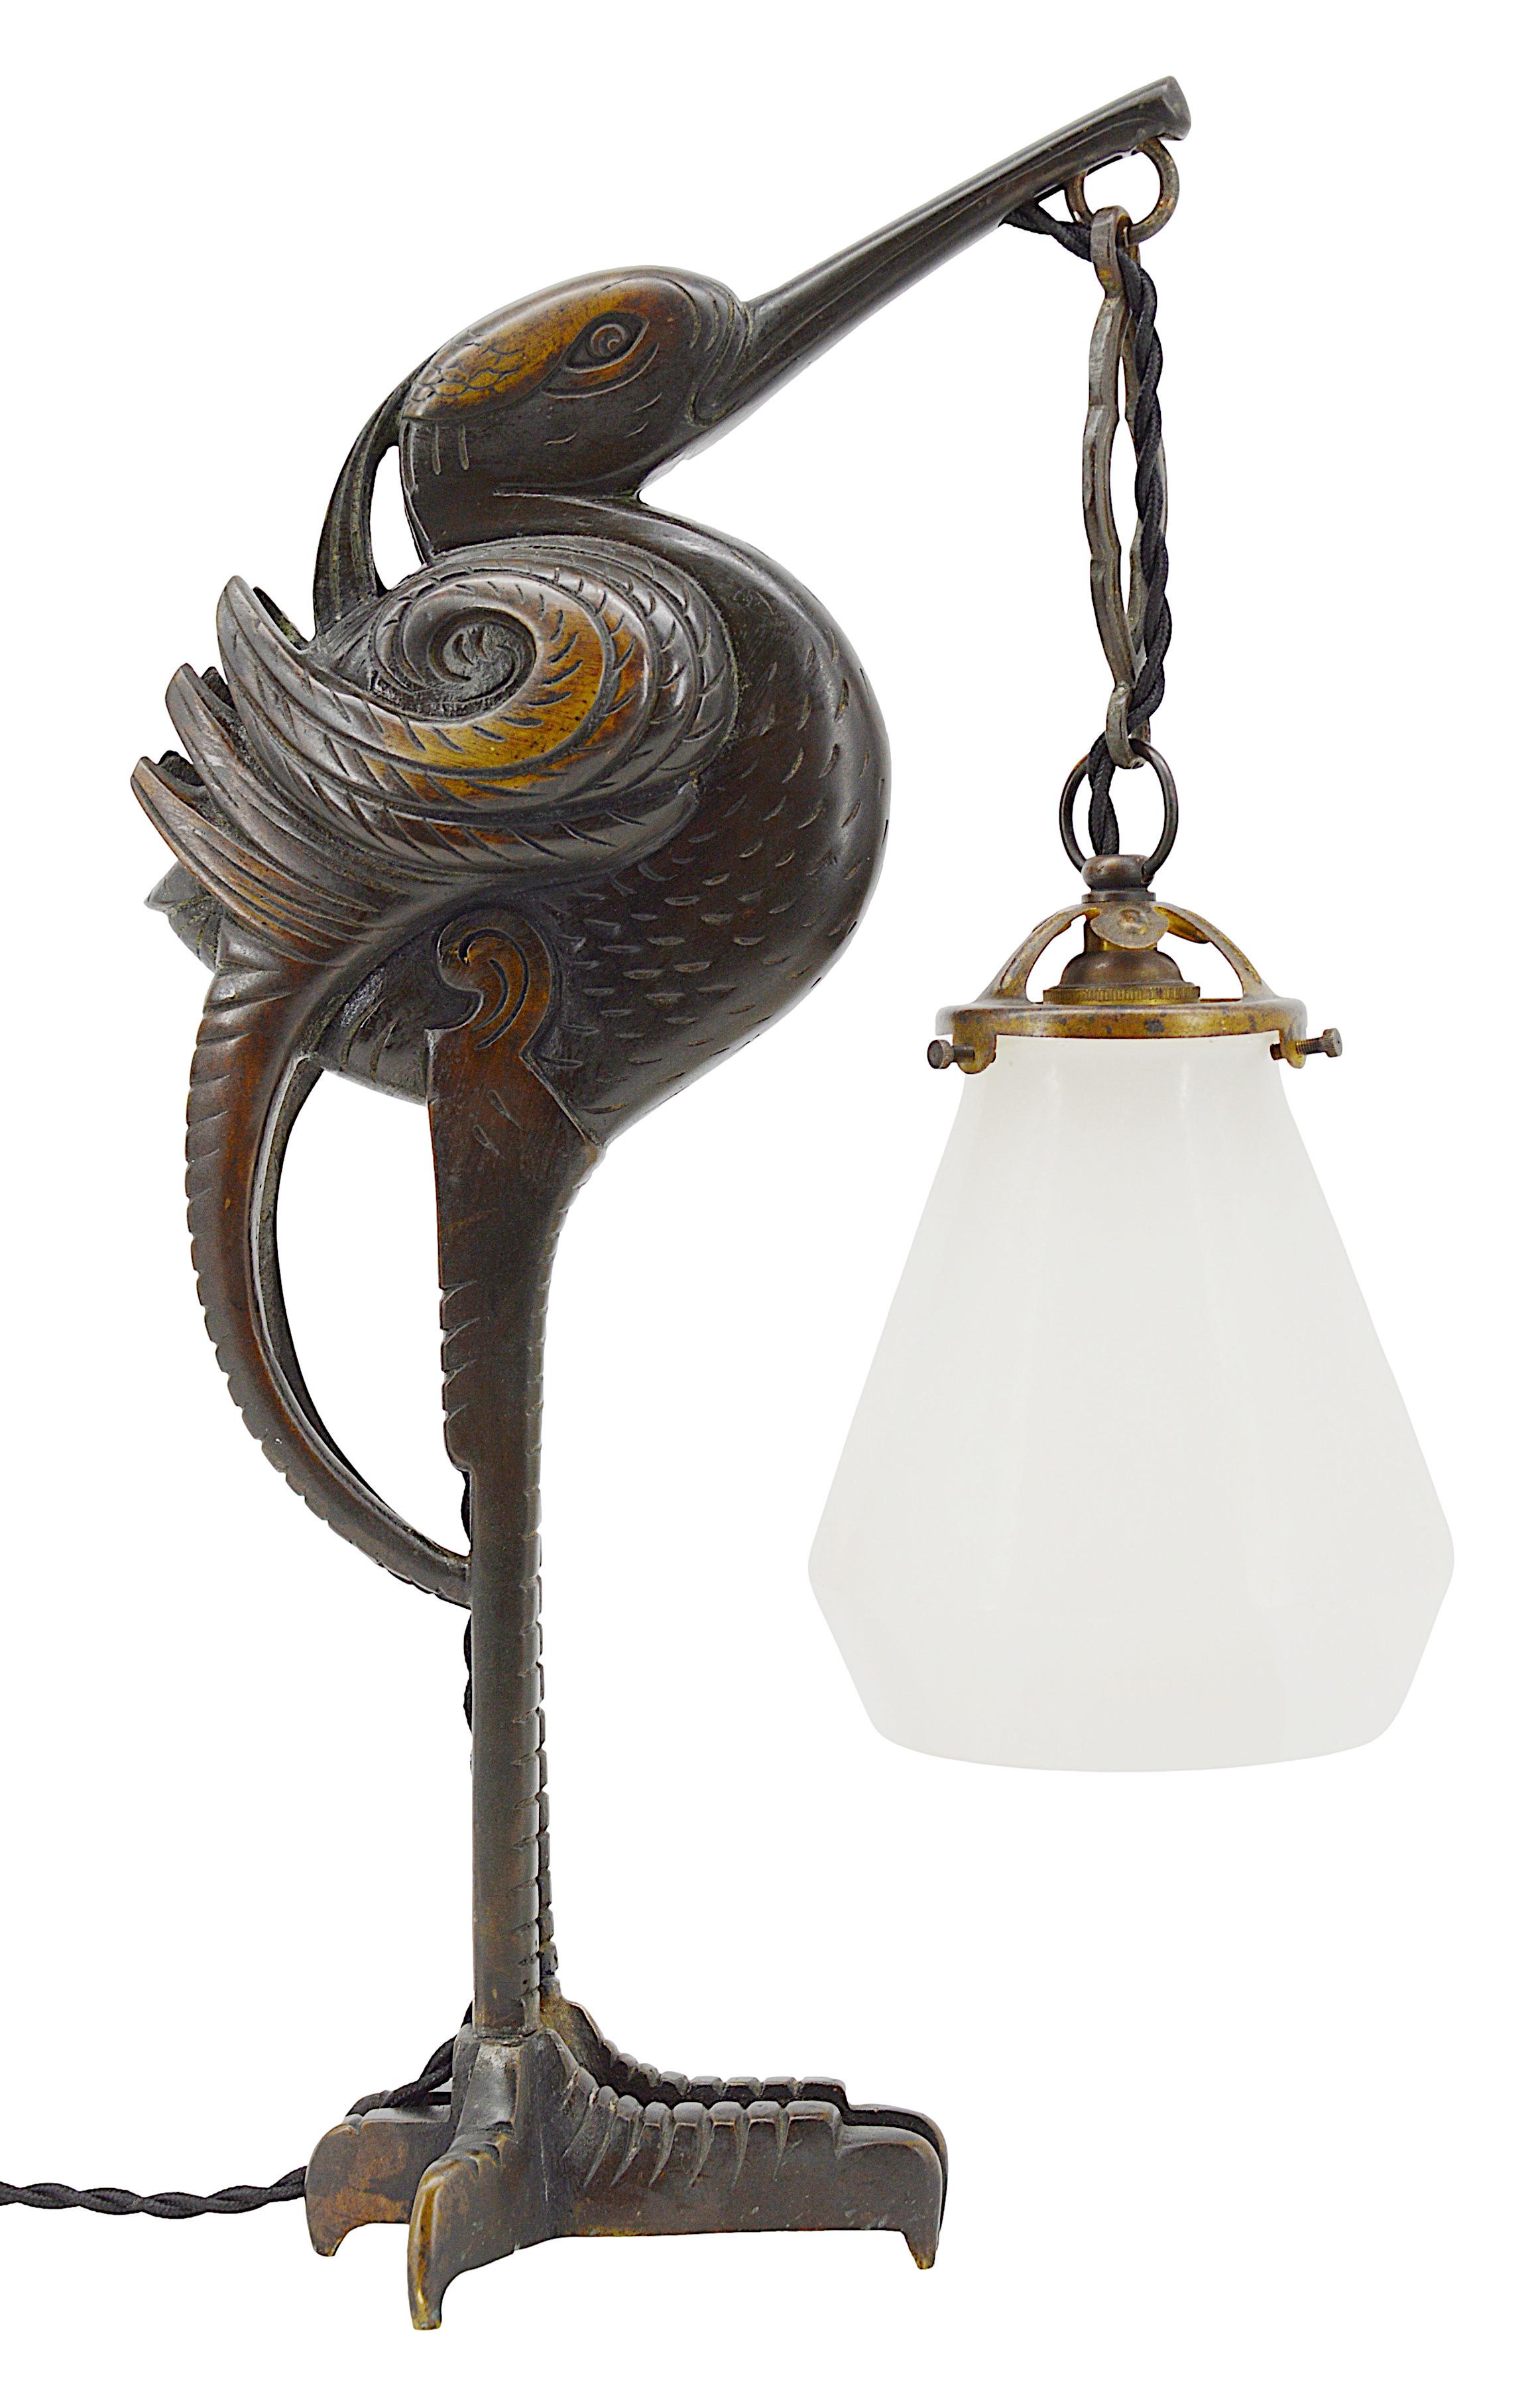 French Art Deco bronze sculpture table lamp by Adolphe Petit-Monsigny, France, ca.1920. Amazing bronze sculpture of an ibis holding an alabaster shade in its beak. Old alabaster cannot be compared to new ones. Old alabaster has veins. Sometimes they